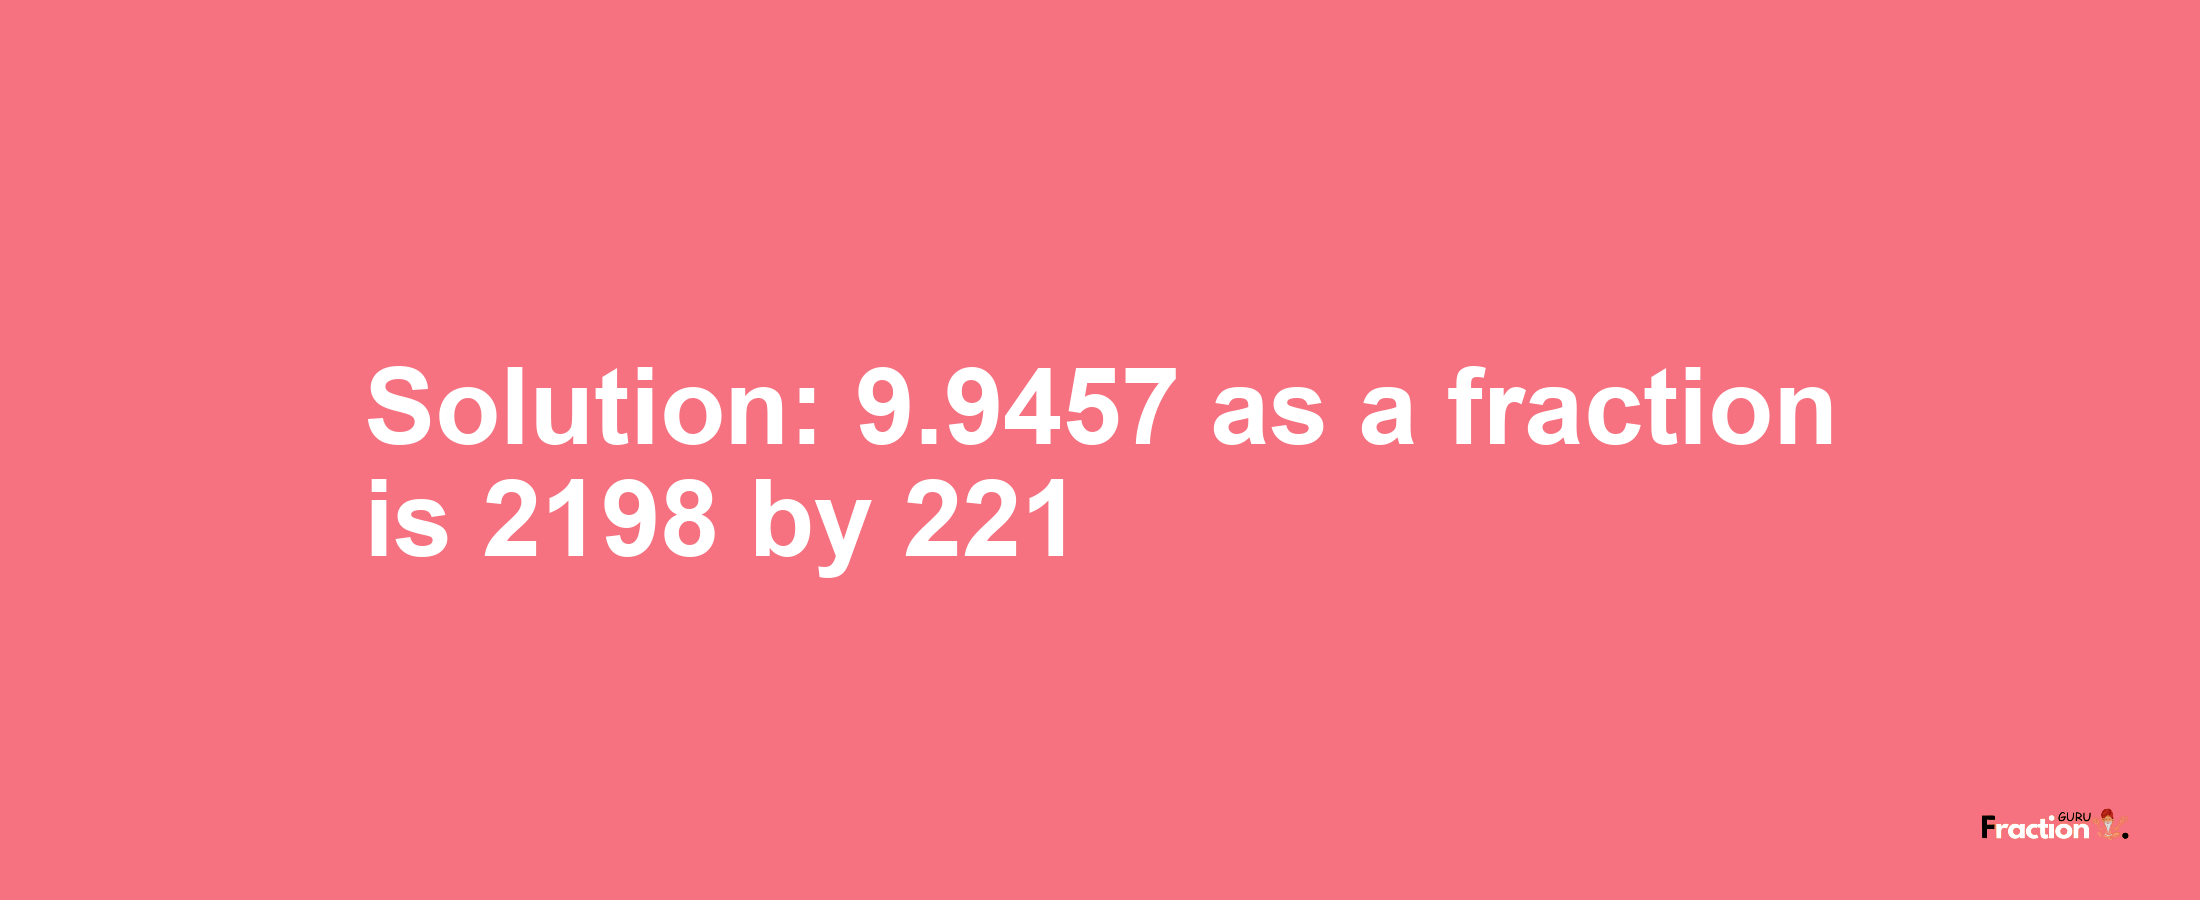 Solution:9.9457 as a fraction is 2198/221